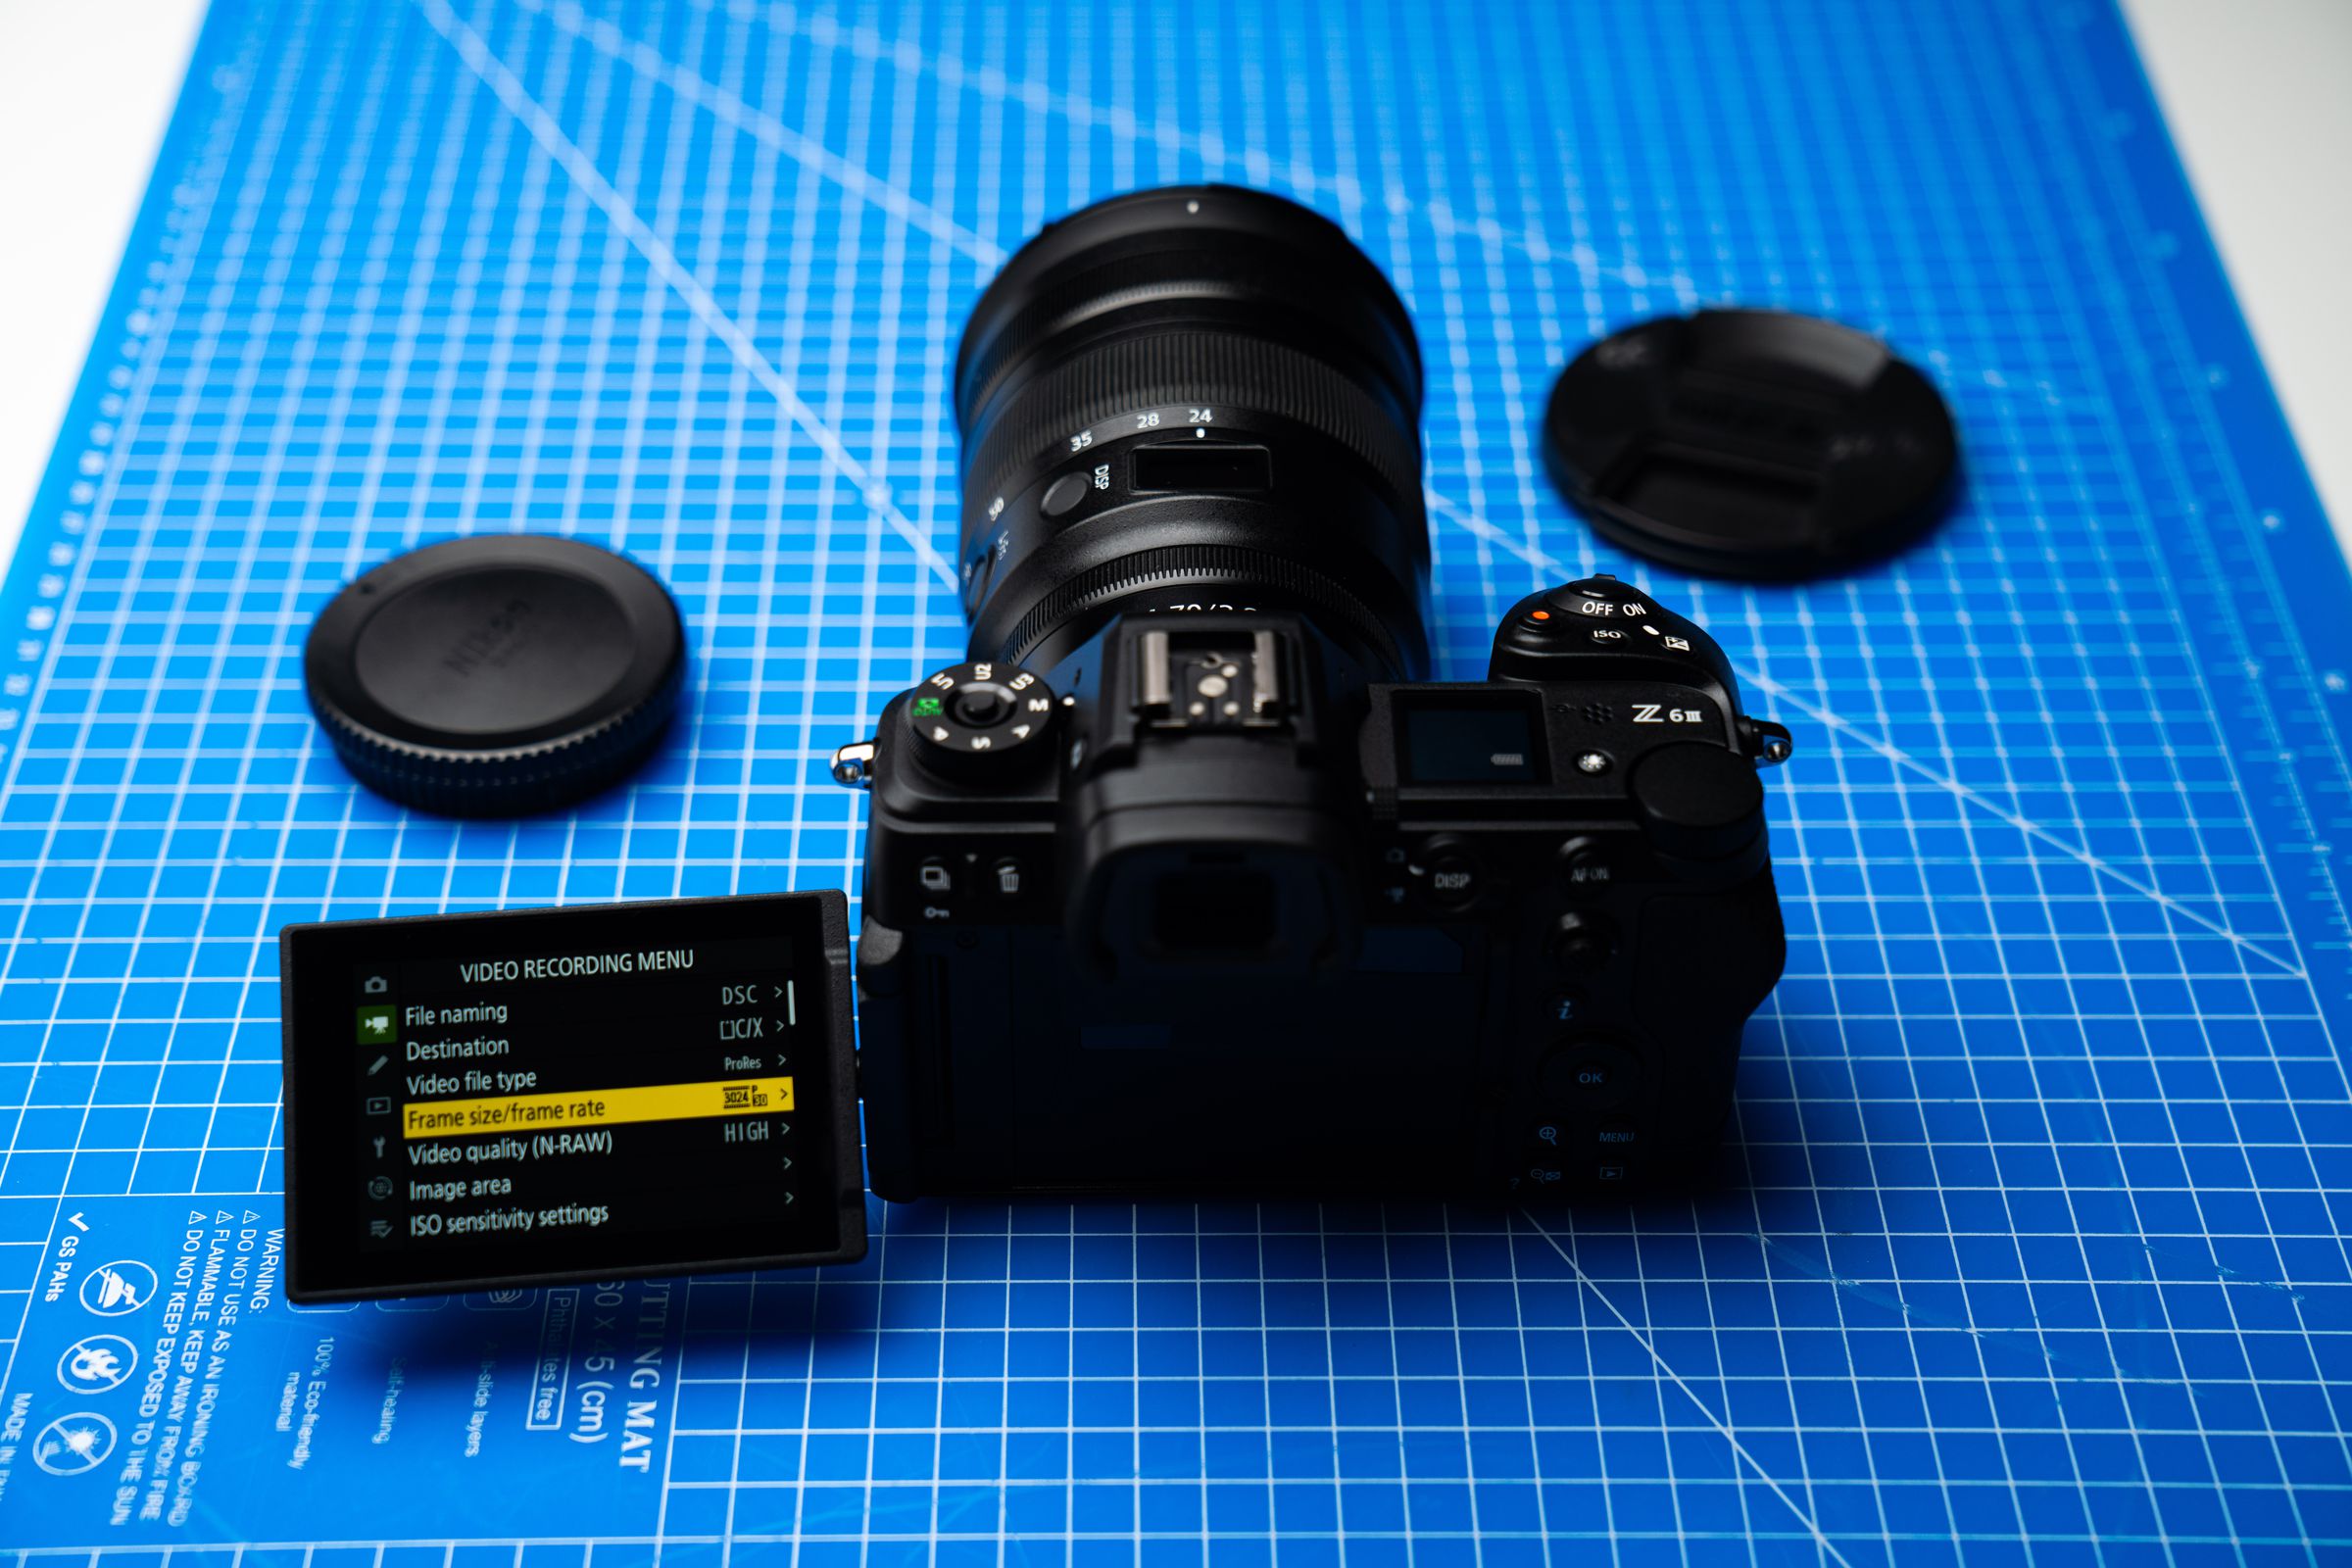 The Nikon Z6 III has an articulating back screen that is typical of hybrid photo / video cameras.